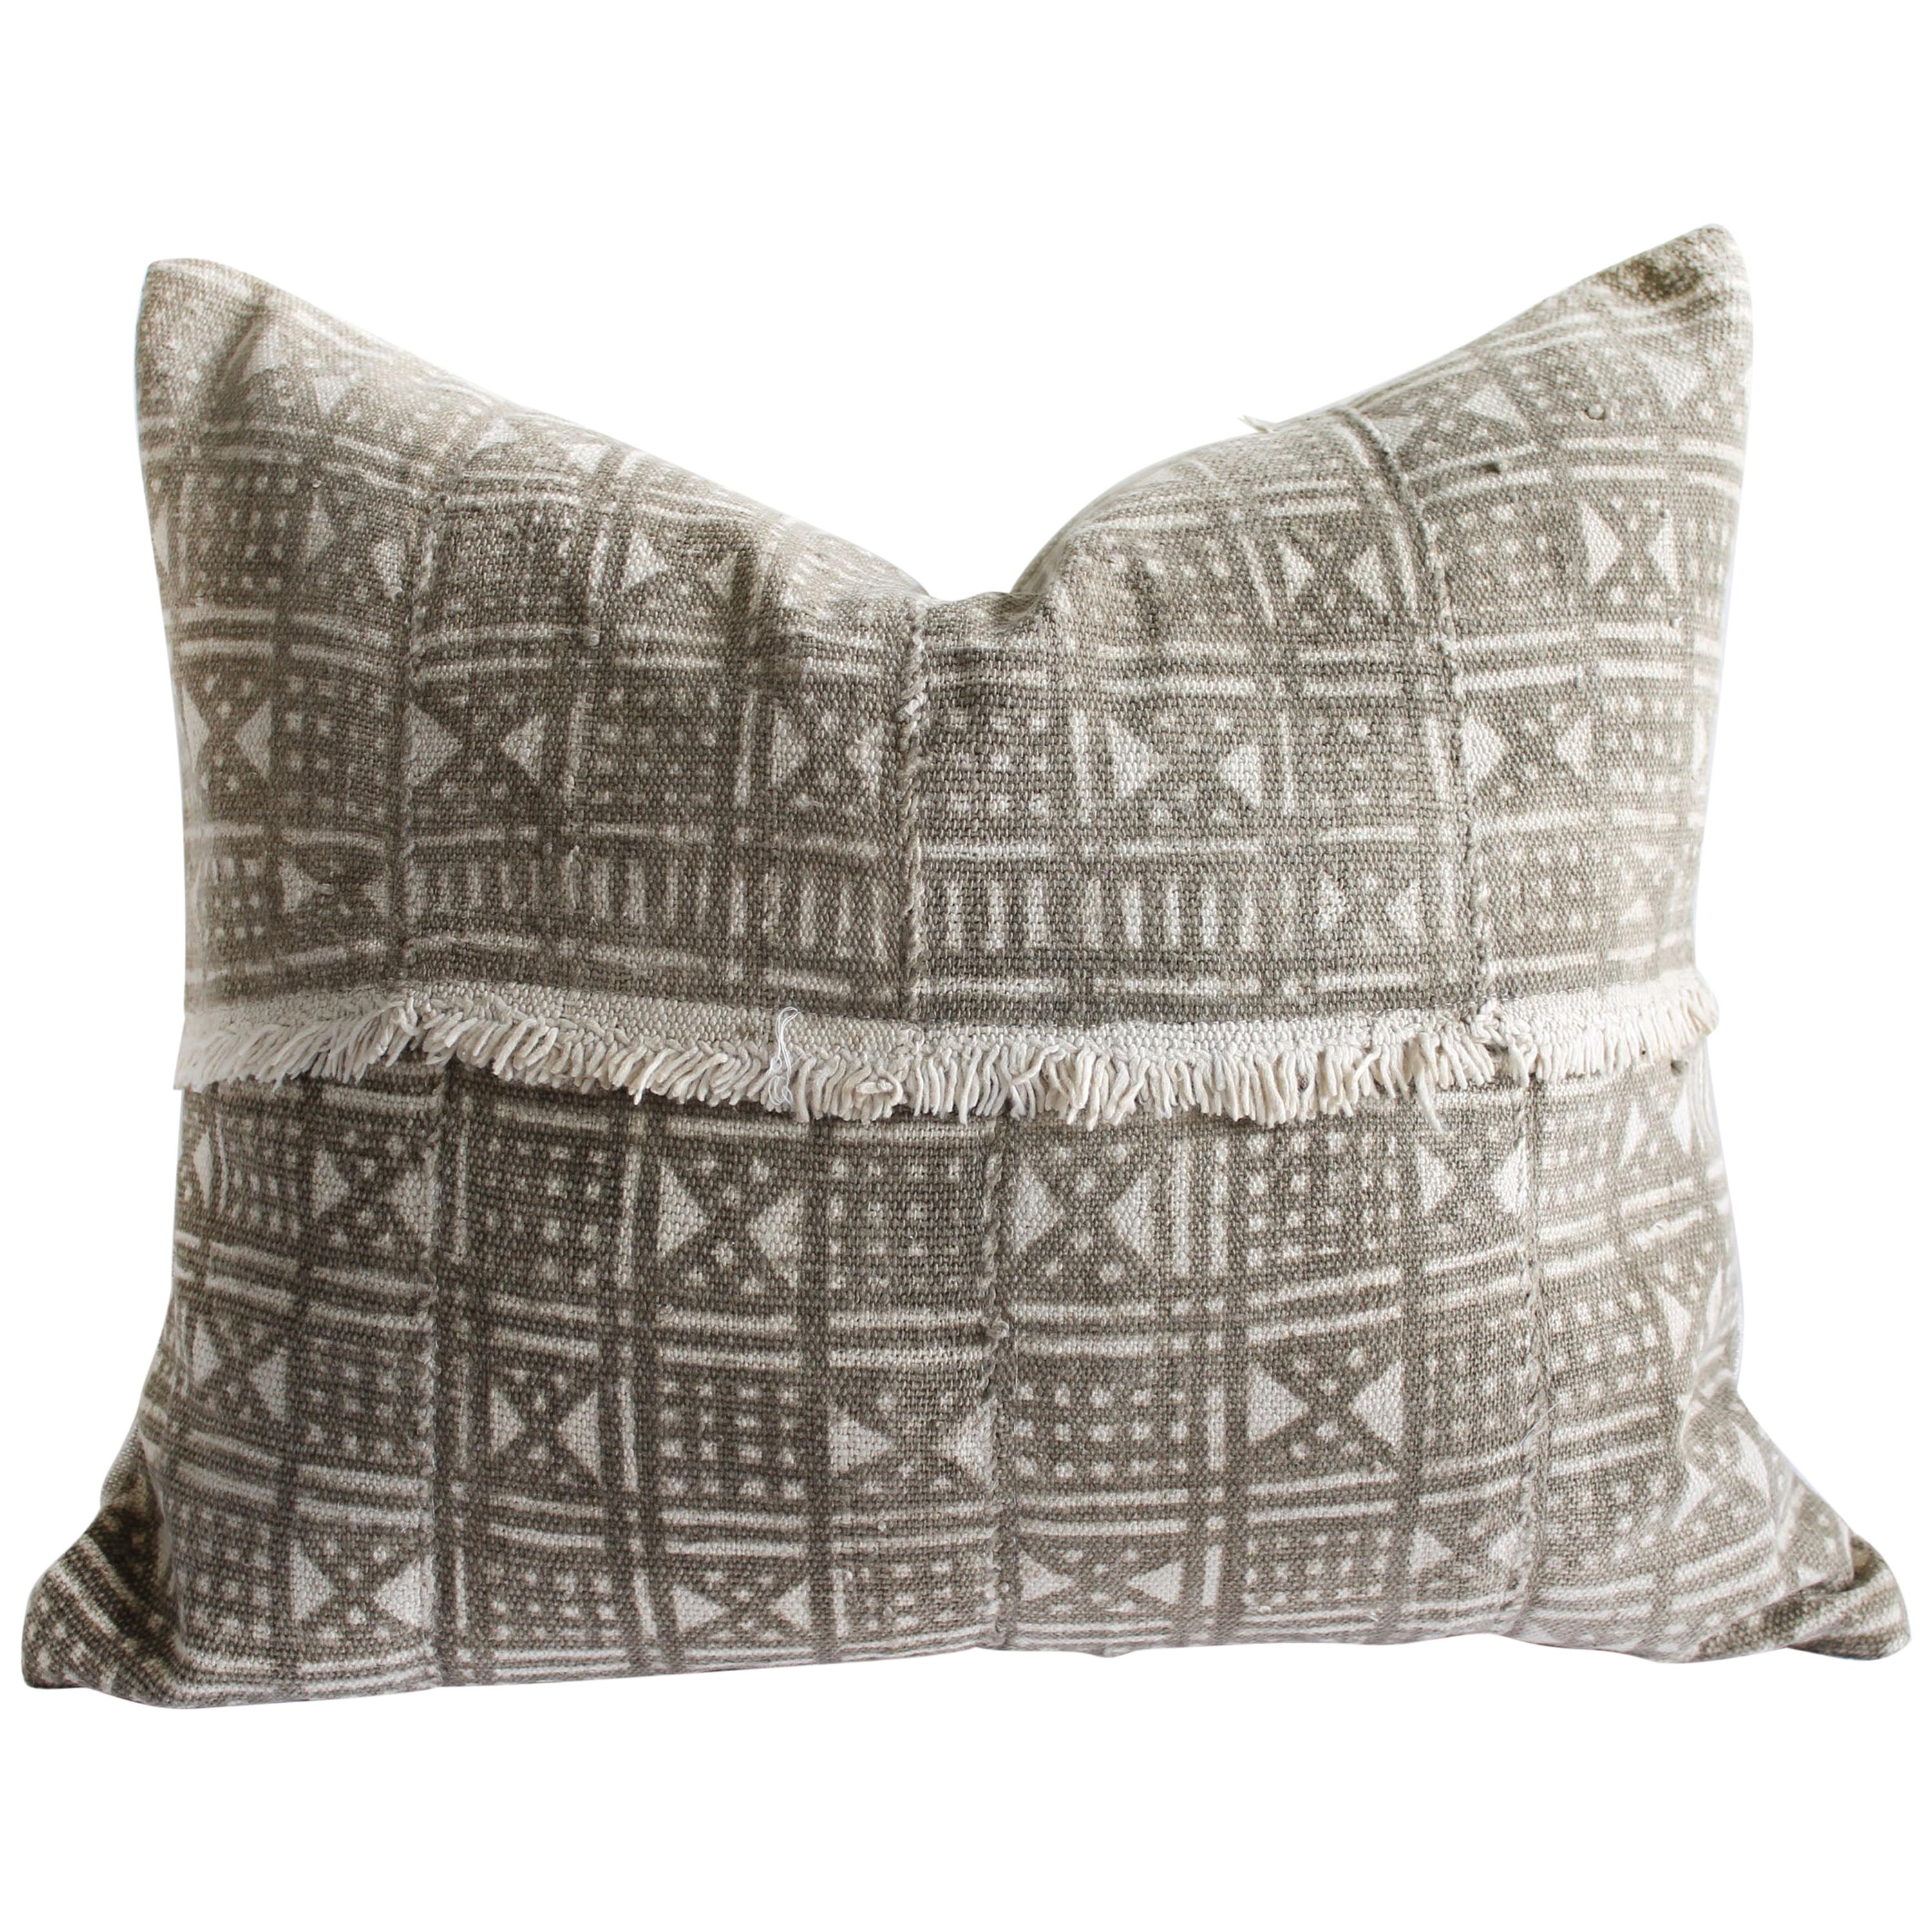 Vintage Mali Cloth Pillow in Natural and Brown with Original Fringe Detail